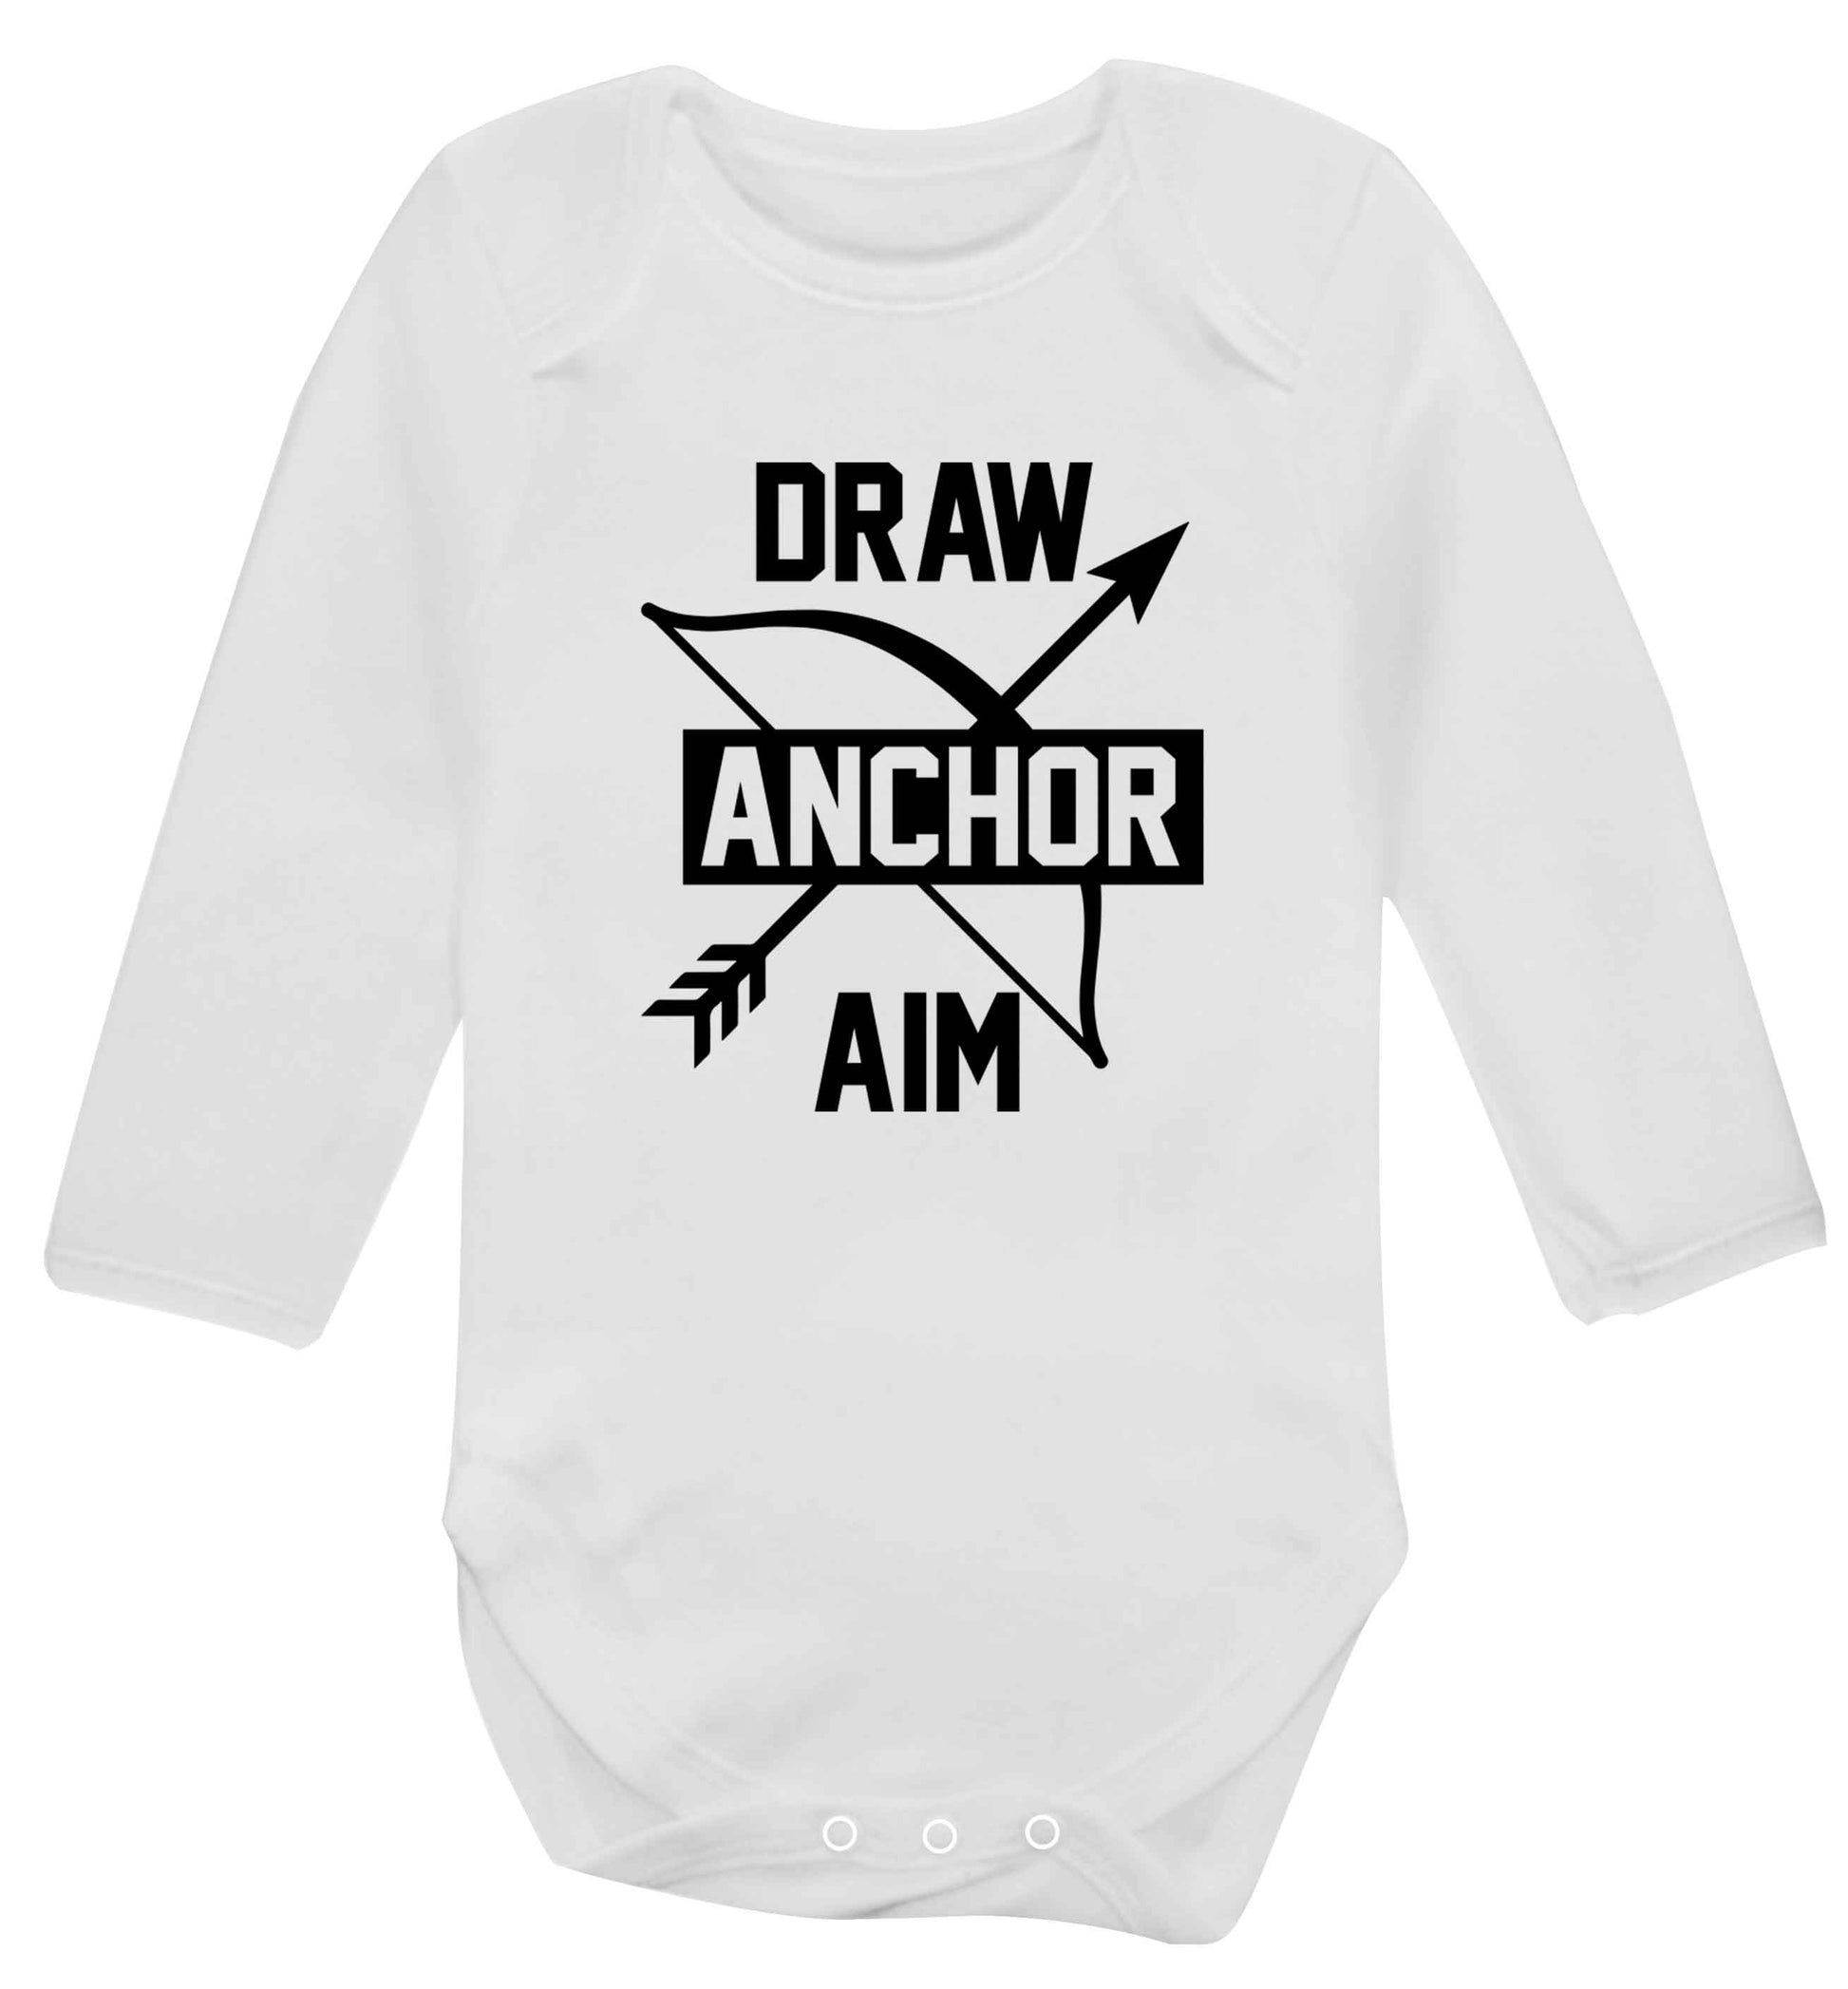 Draw anchor aim Baby Vest long sleeved white 6-12 months